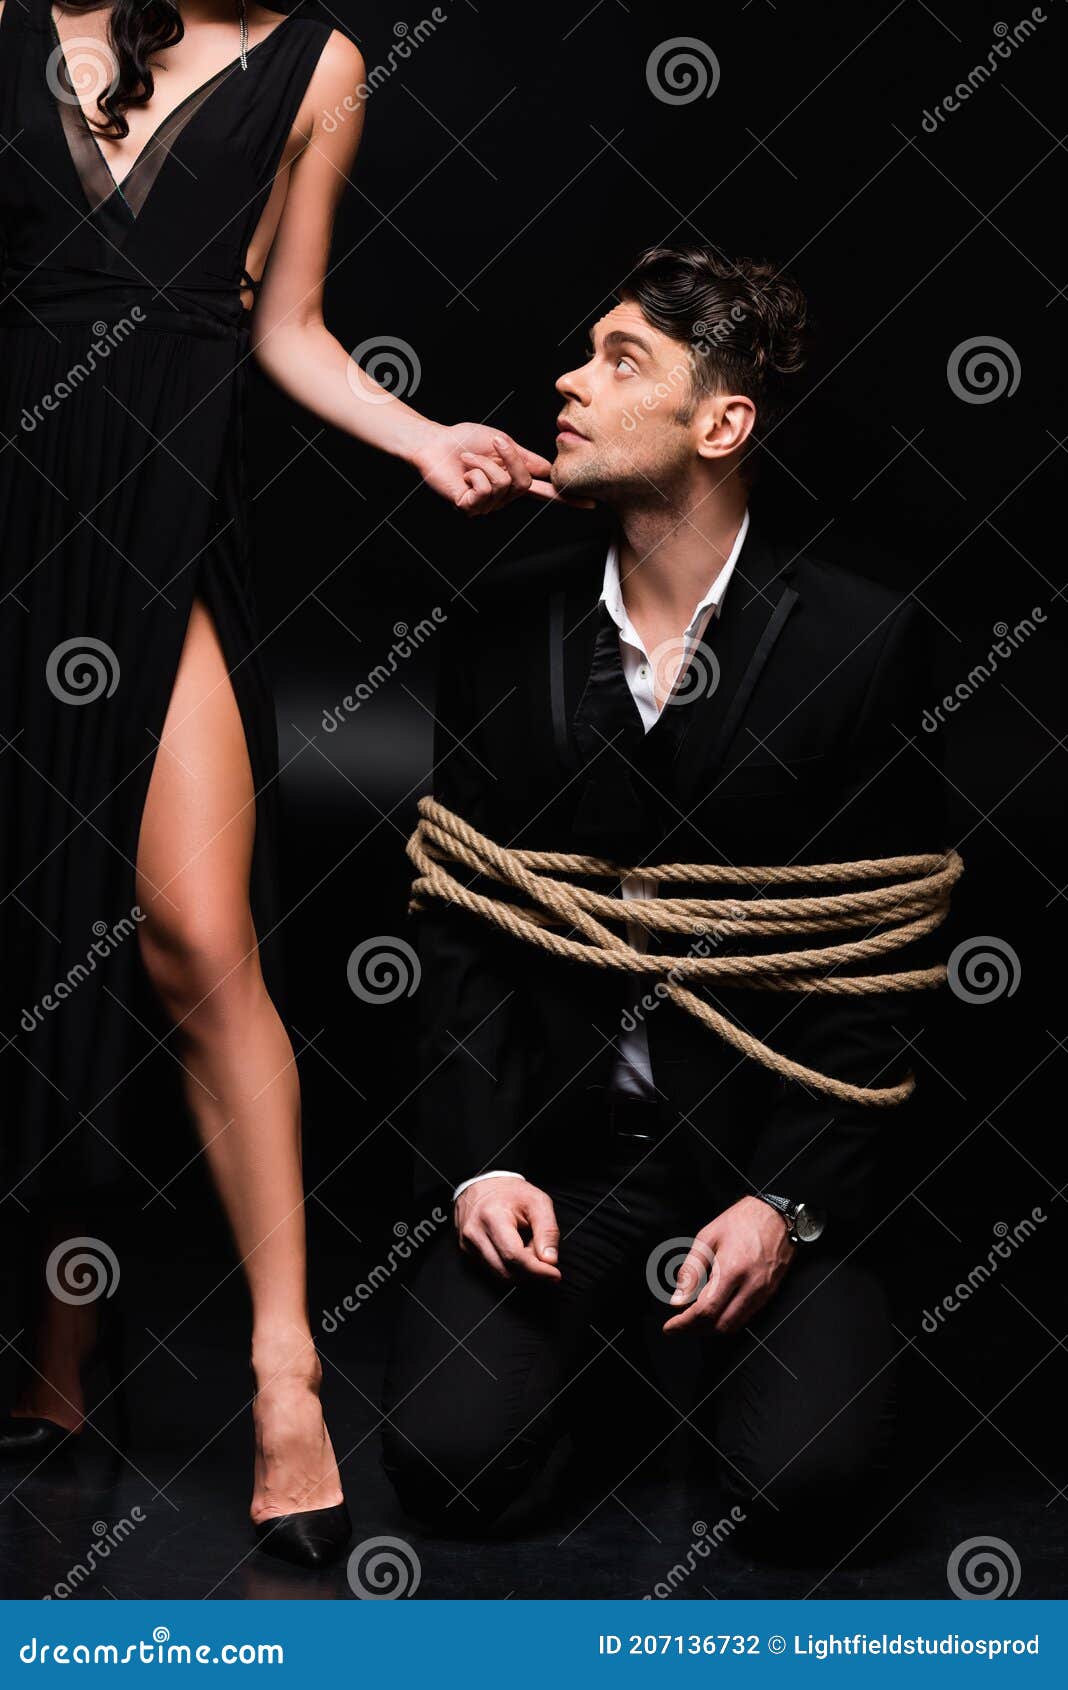 Sexy Man Tied Up